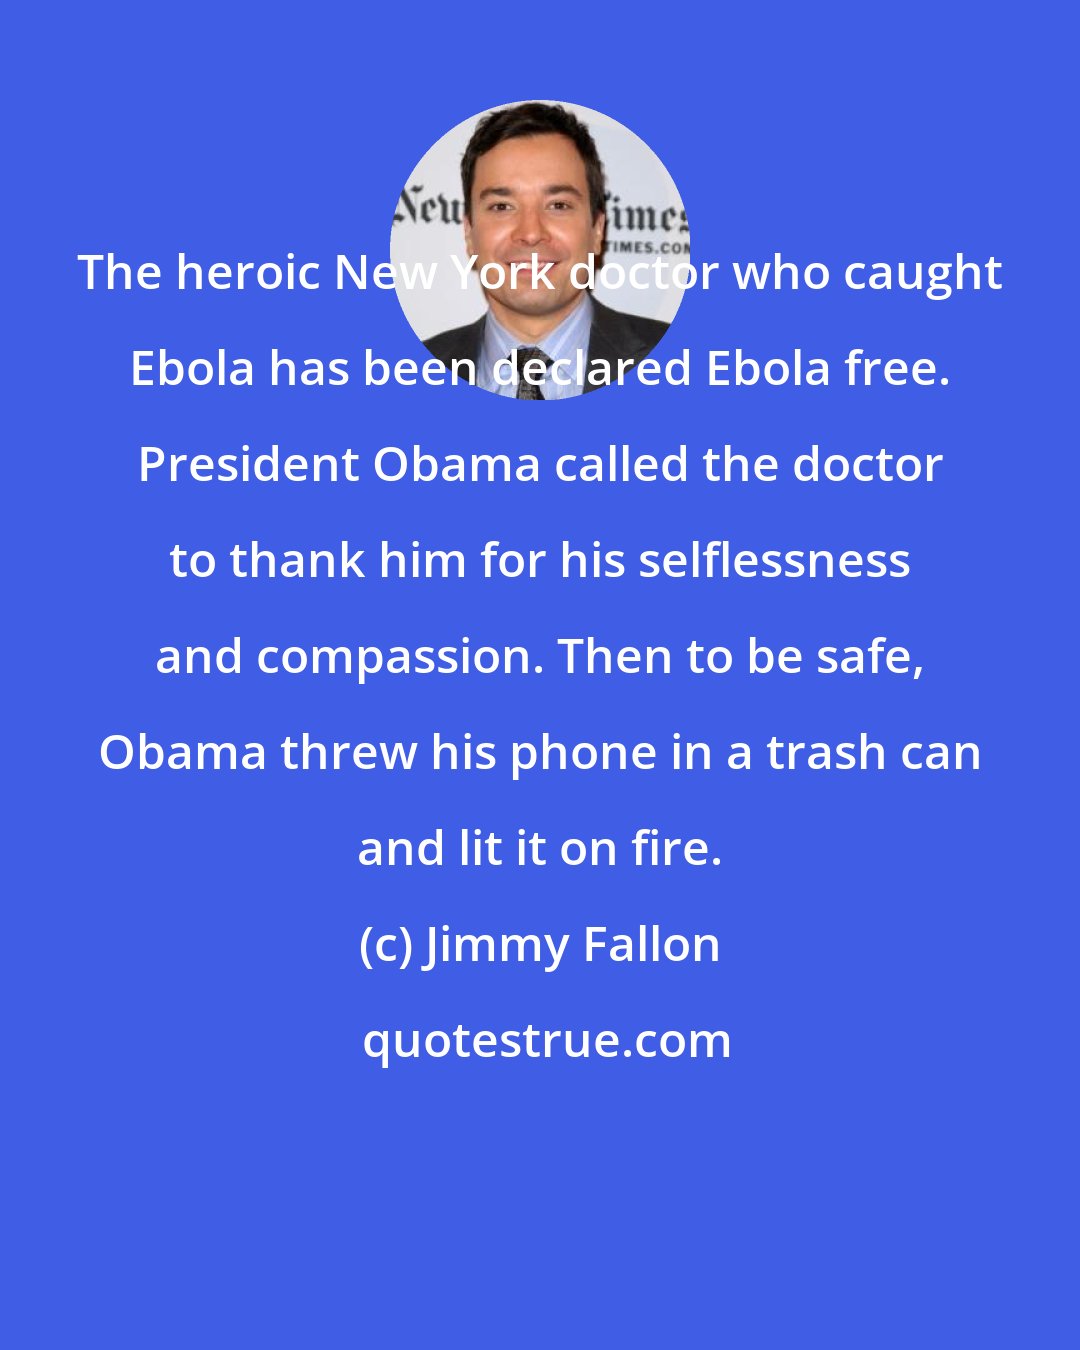 Jimmy Fallon: The heroic New York doctor who caught Ebola has been declared Ebola free. President Obama called the doctor to thank him for his selflessness and compassion. Then to be safe, Obama threw his phone in a trash can and lit it on fire.